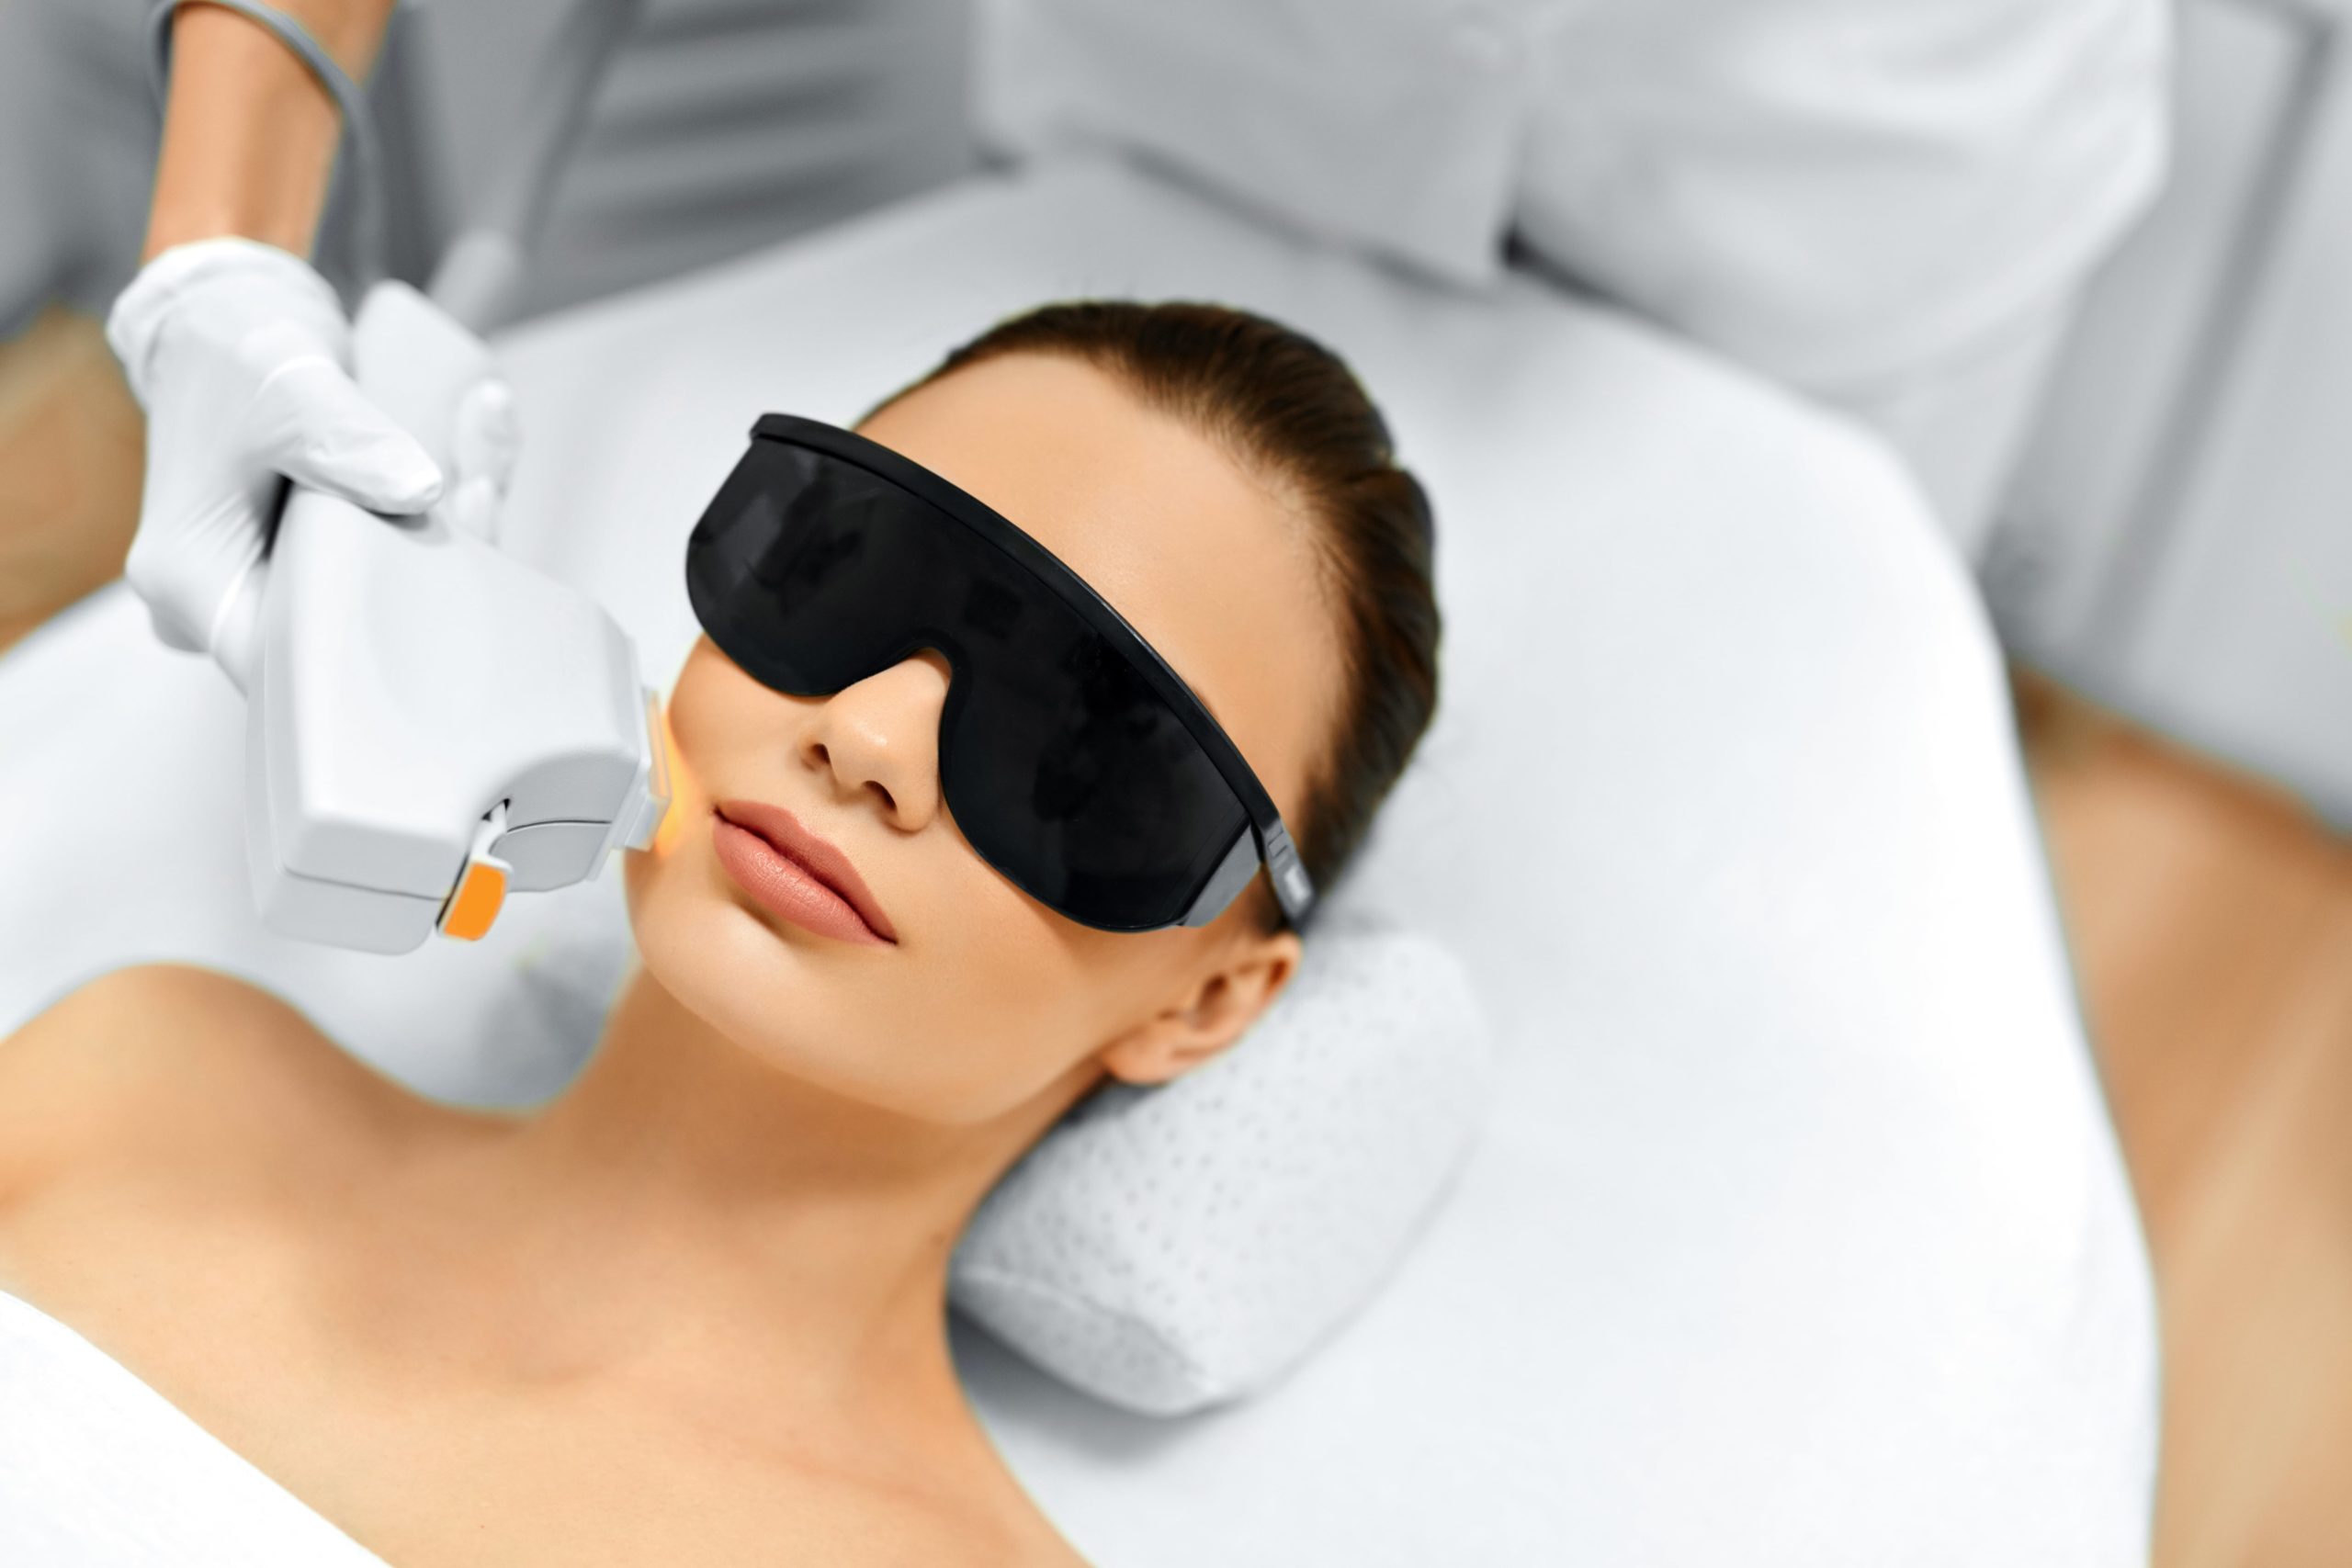 Woman Receiving Fraxel Laser Therapy by Wearing Safety Goggles | Purely Natural Medical Spa in Brooklyn, NY